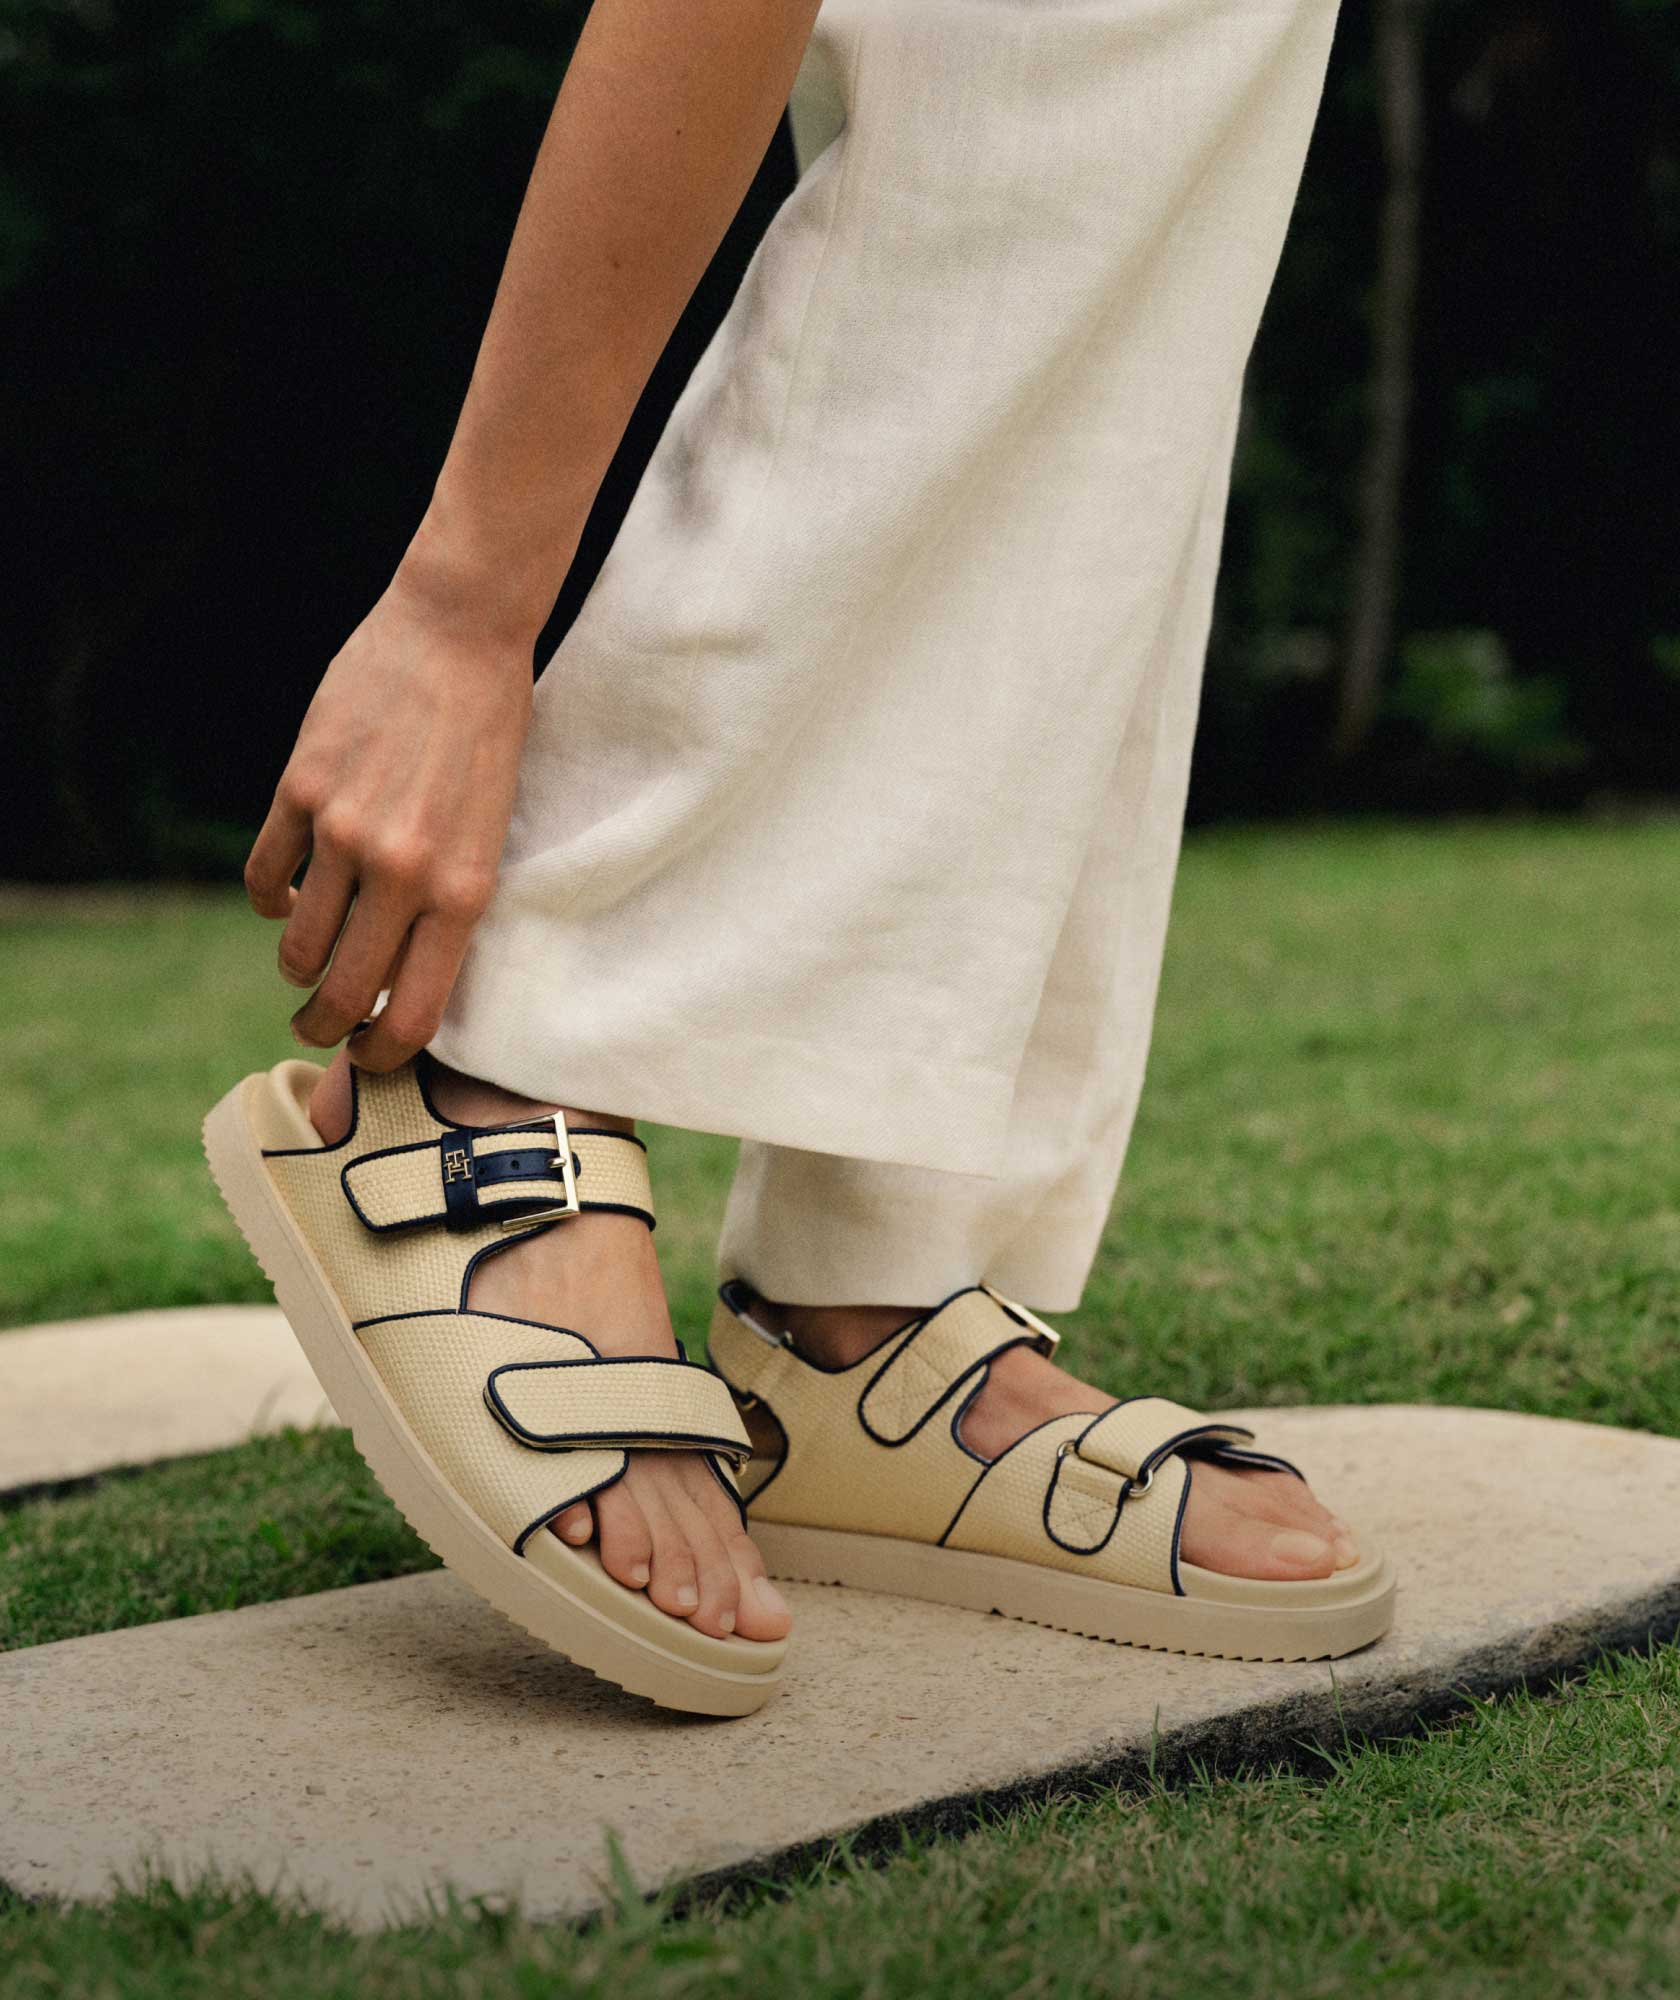 A female model wears new summer sandals from Tommy Hilfiger.